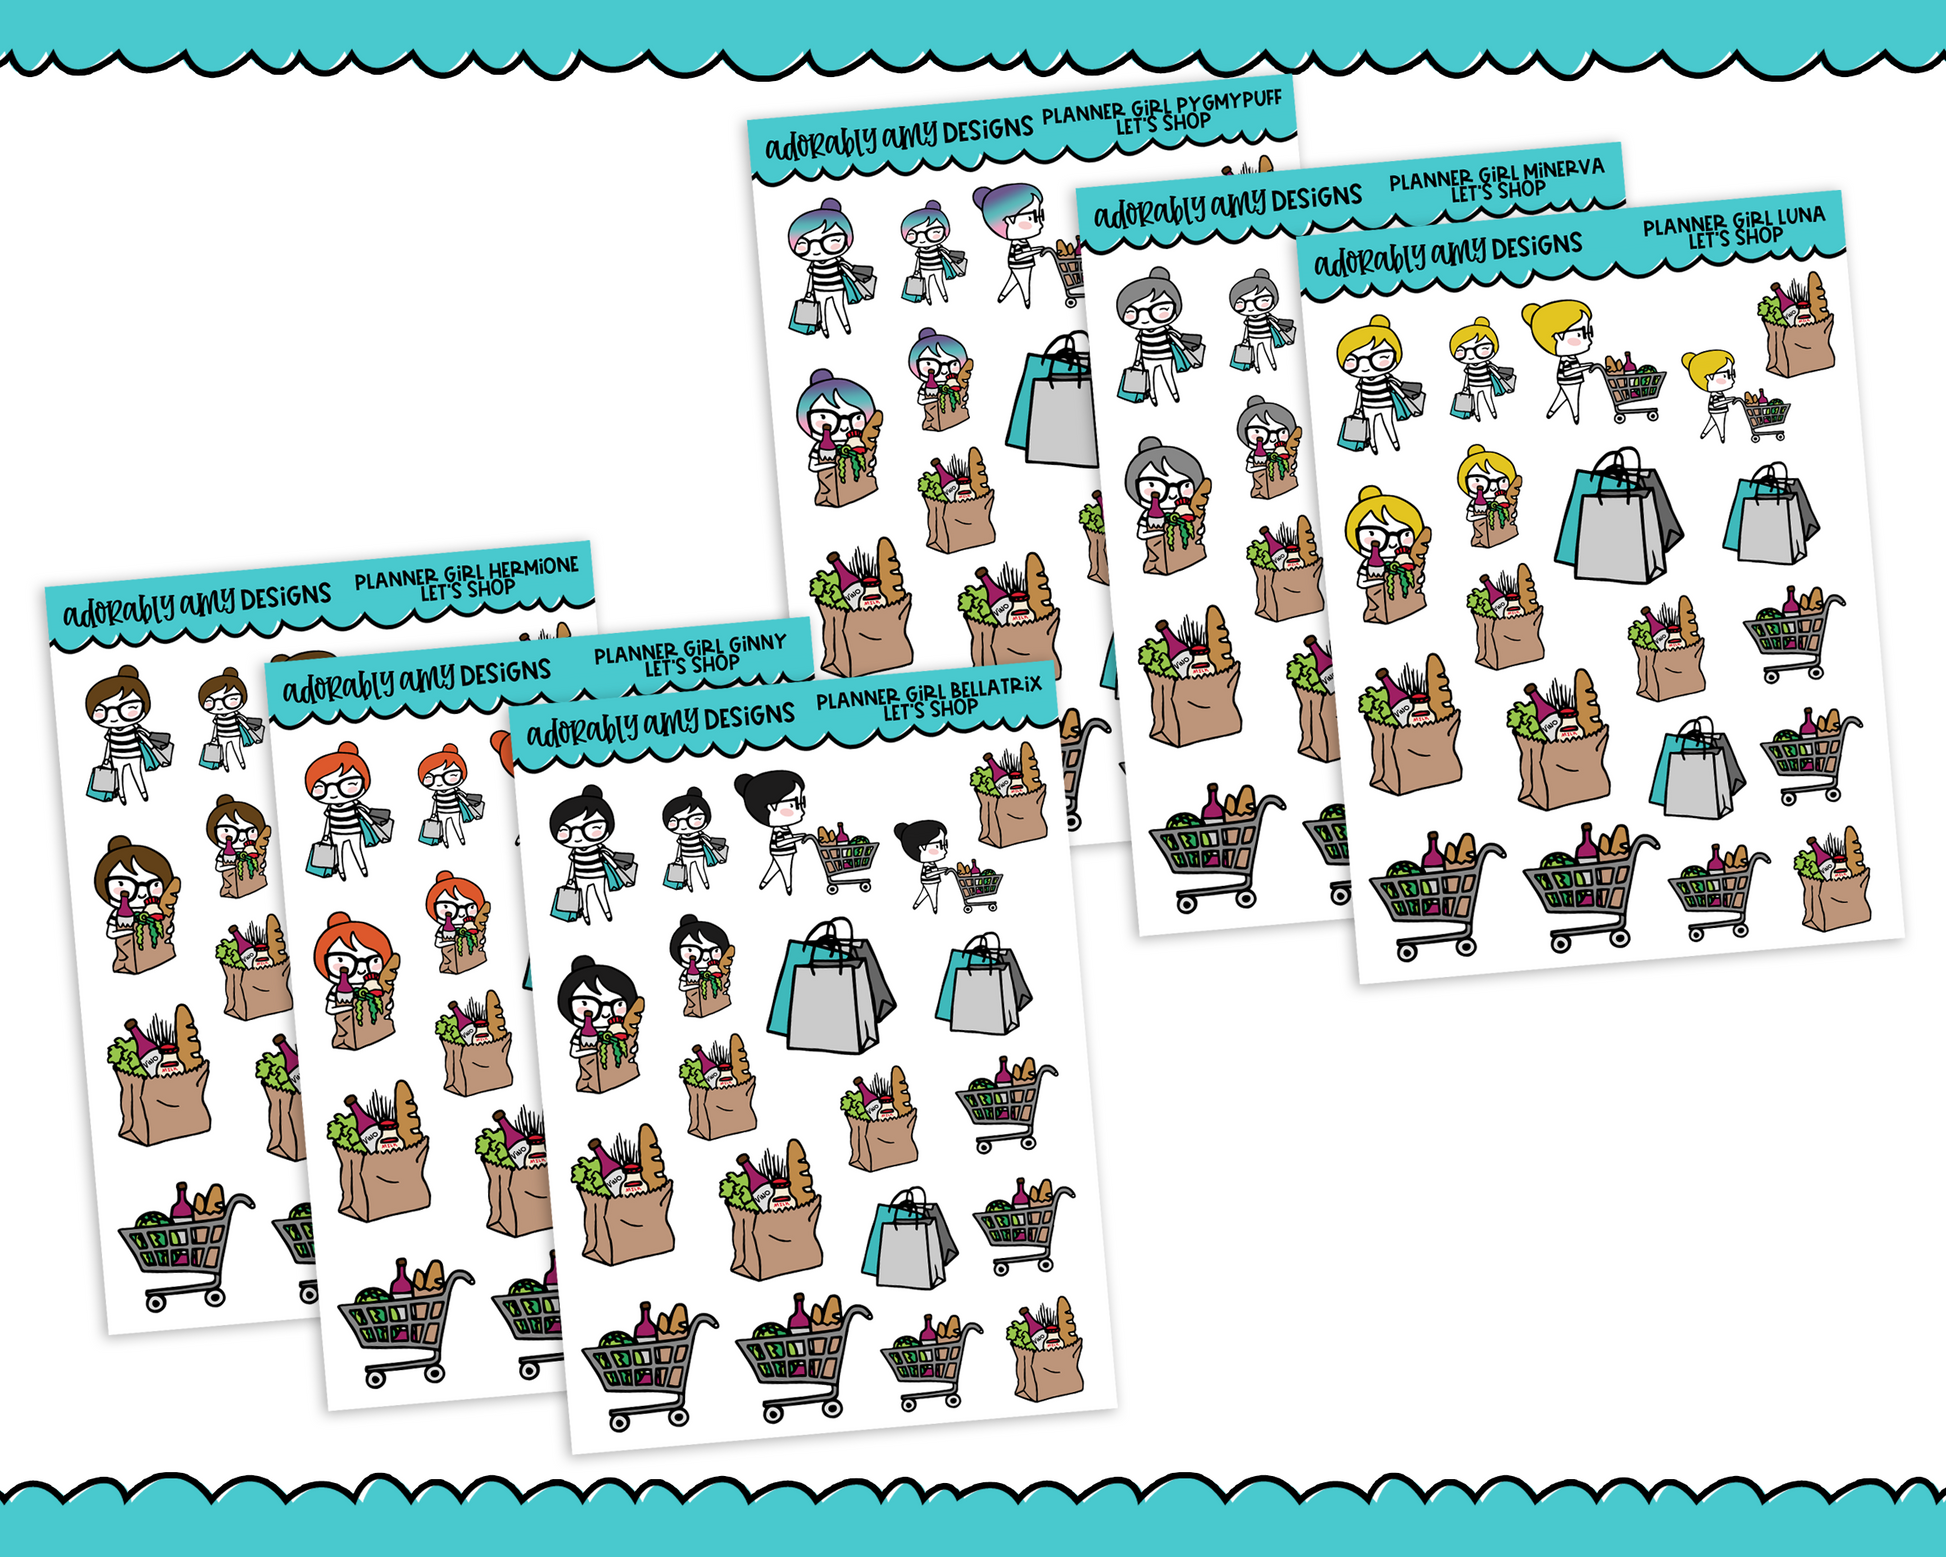 Planner Girls Character Stickers Let's Shop Planner Stickers for any Planner or Insert - Adorably Amy Designs